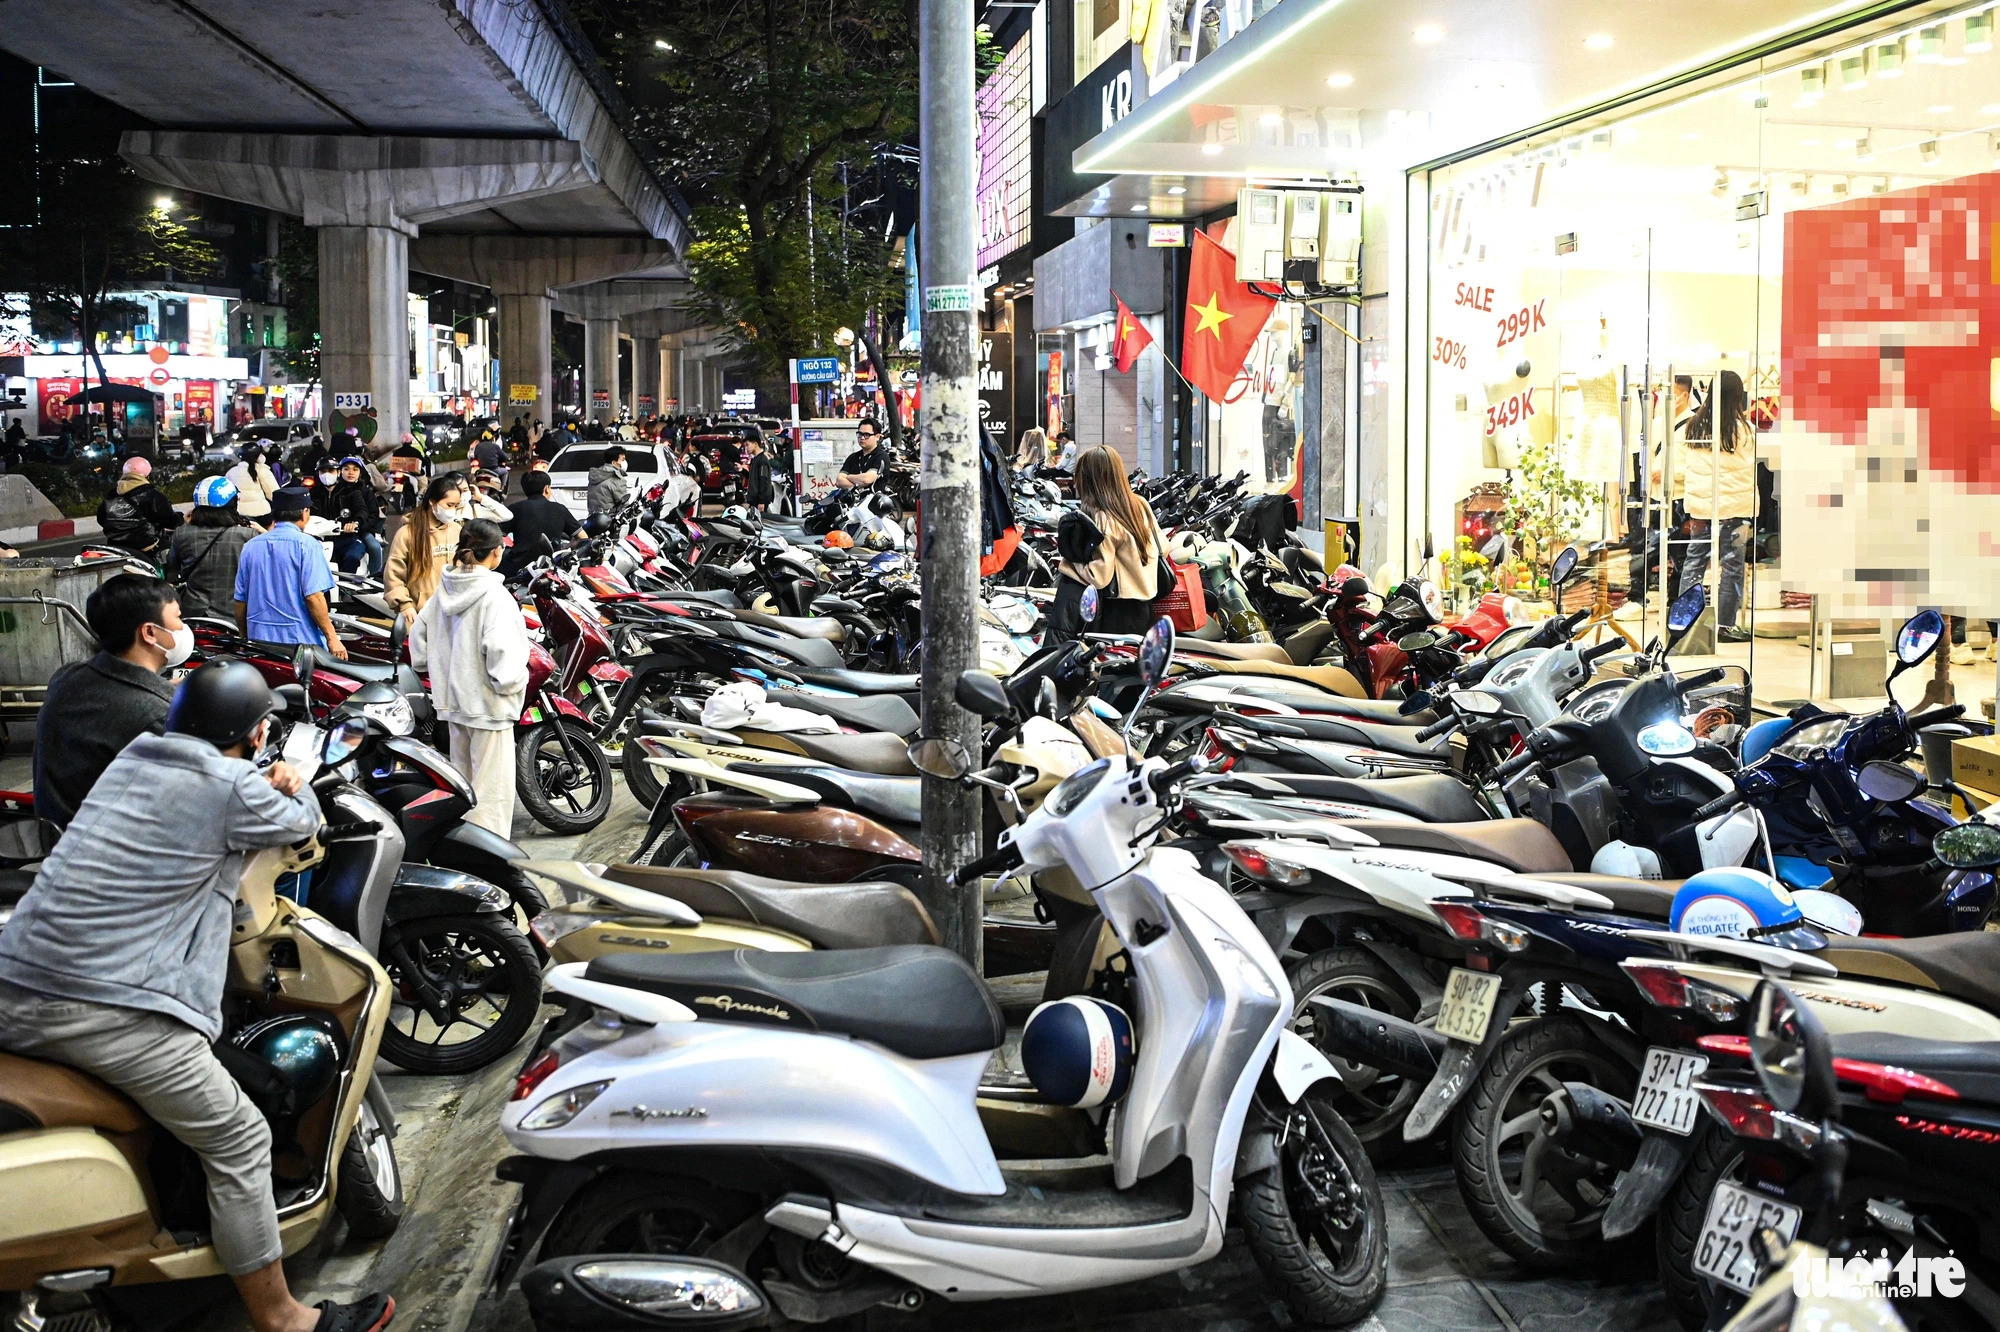 Both the sidewalks and roadsides on Cau Giay Street in Hanoi are full of vehicles amid the Tet shopping season. Photo: Hong Quang / Tuoi Tre